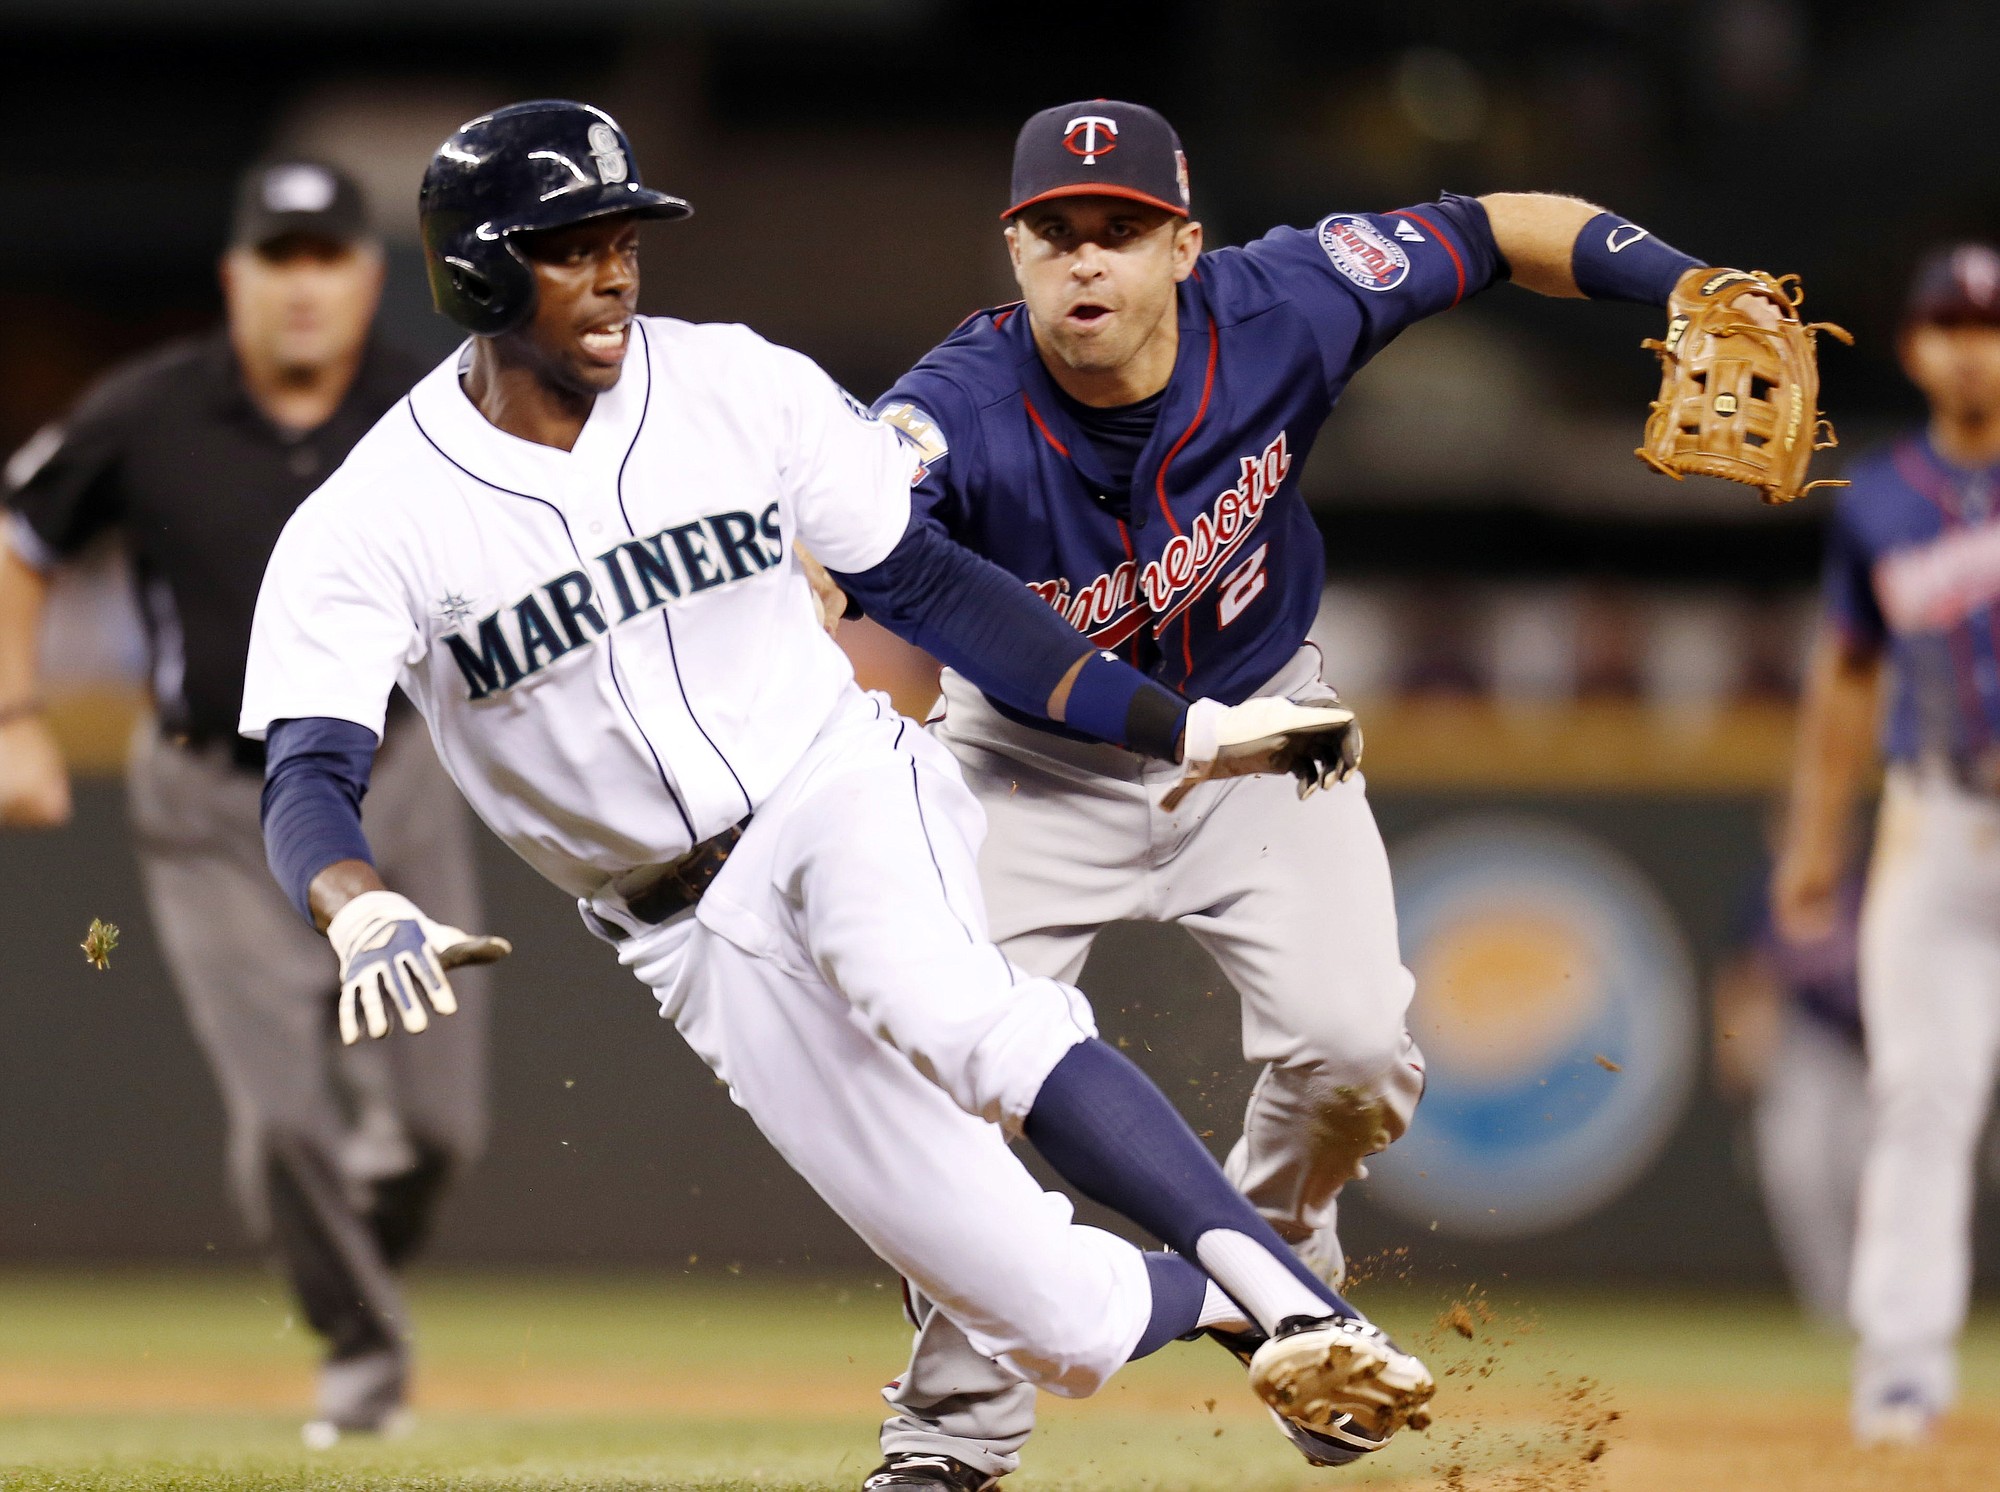 Minnesota Twins second baseman Brian Dozier, right, tags Seattle Mariners' James Jones out as Robinson Cano grounds out into a double play during the eighth inning Tuesday.